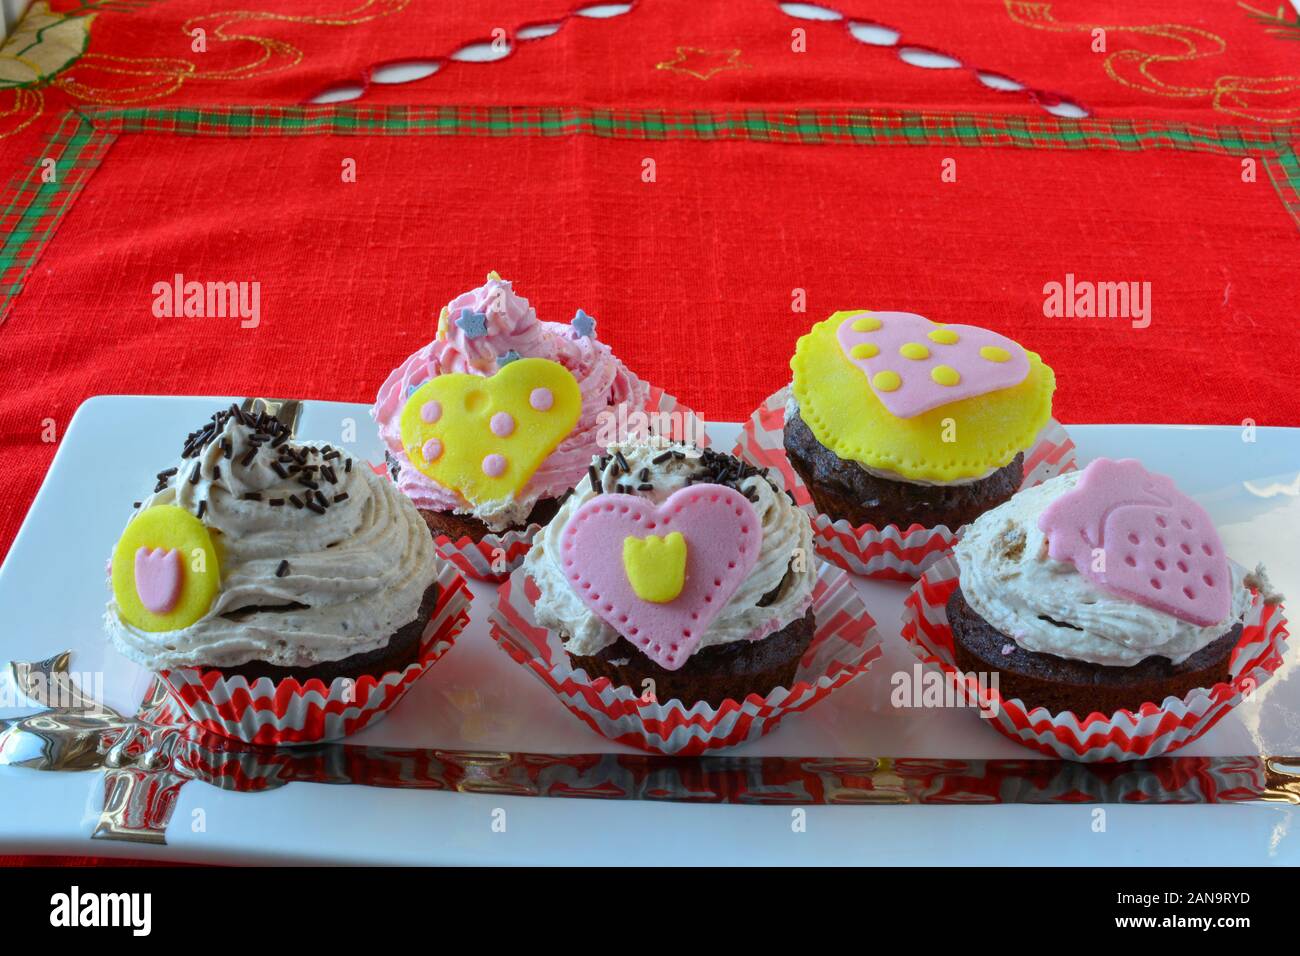 Love muffins, colorful cupcakes decorated with marzipan hearts served in white ceramic saucer, side view Stock Photo